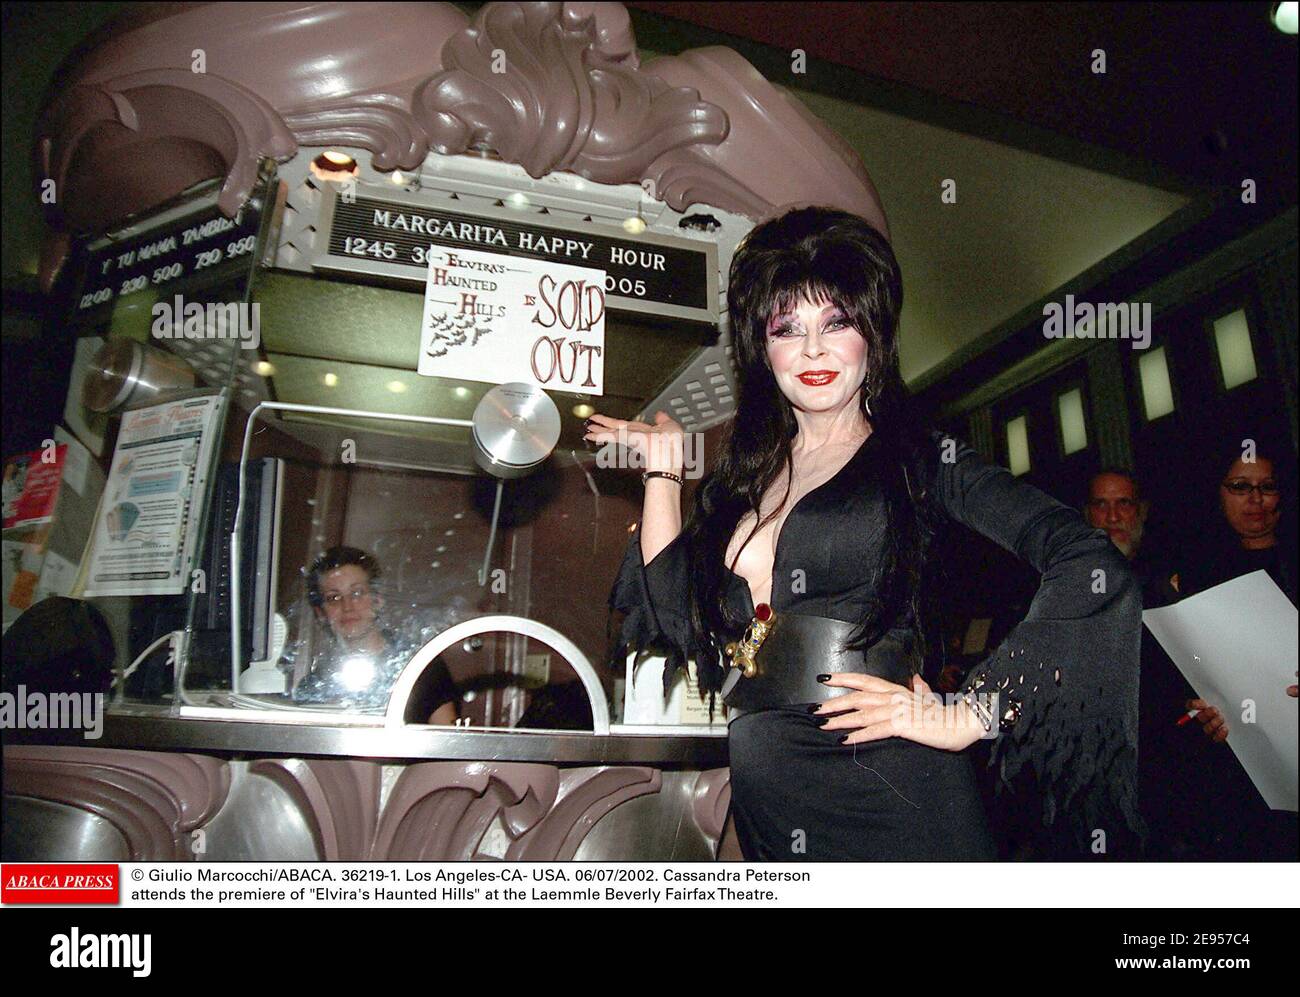 © Giulio Marcocchi/ABACA. 36219-1. Los Angeles-CA- USA. 06/07/2002. Cassandra Peterson attends the premiere of Elvira's Haunted Hills at the Laemmle Beverly Fairfax Theatre. Stock Photo